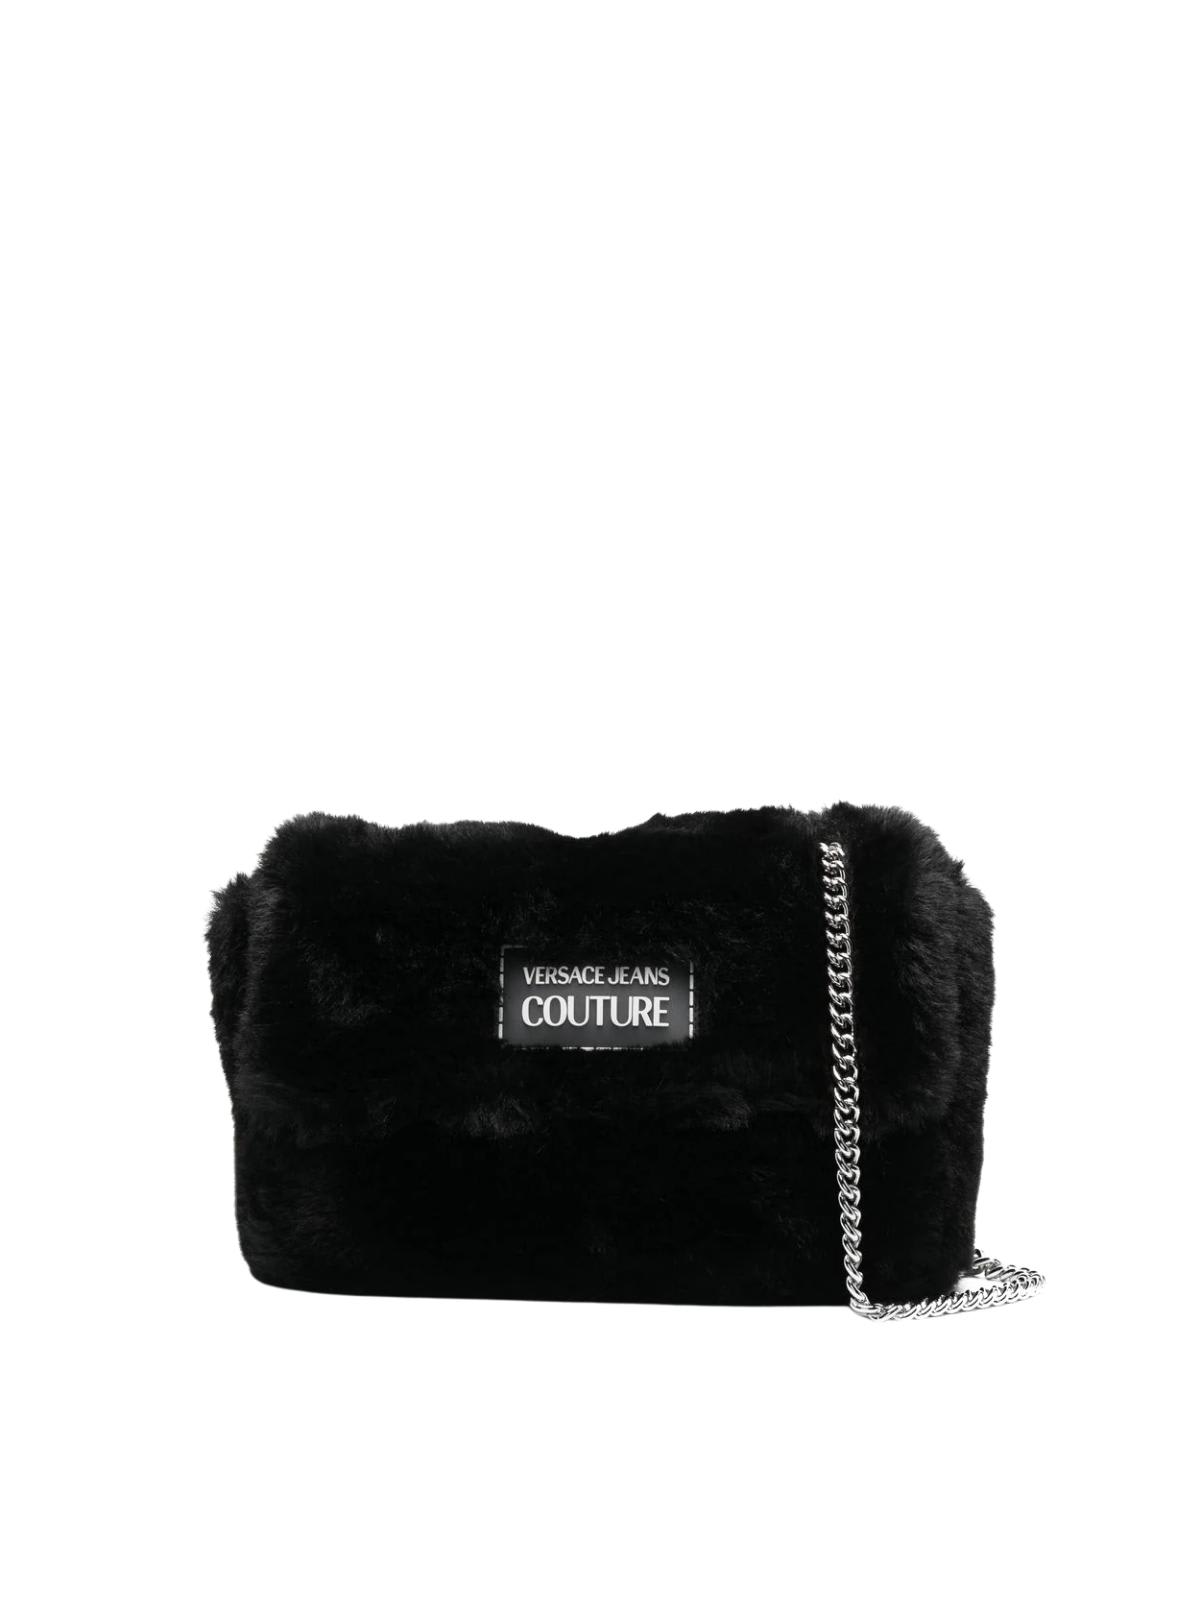 Versace Jeans Couture Range B Fluffy Bag Synthetic Fur Crossbody Bag